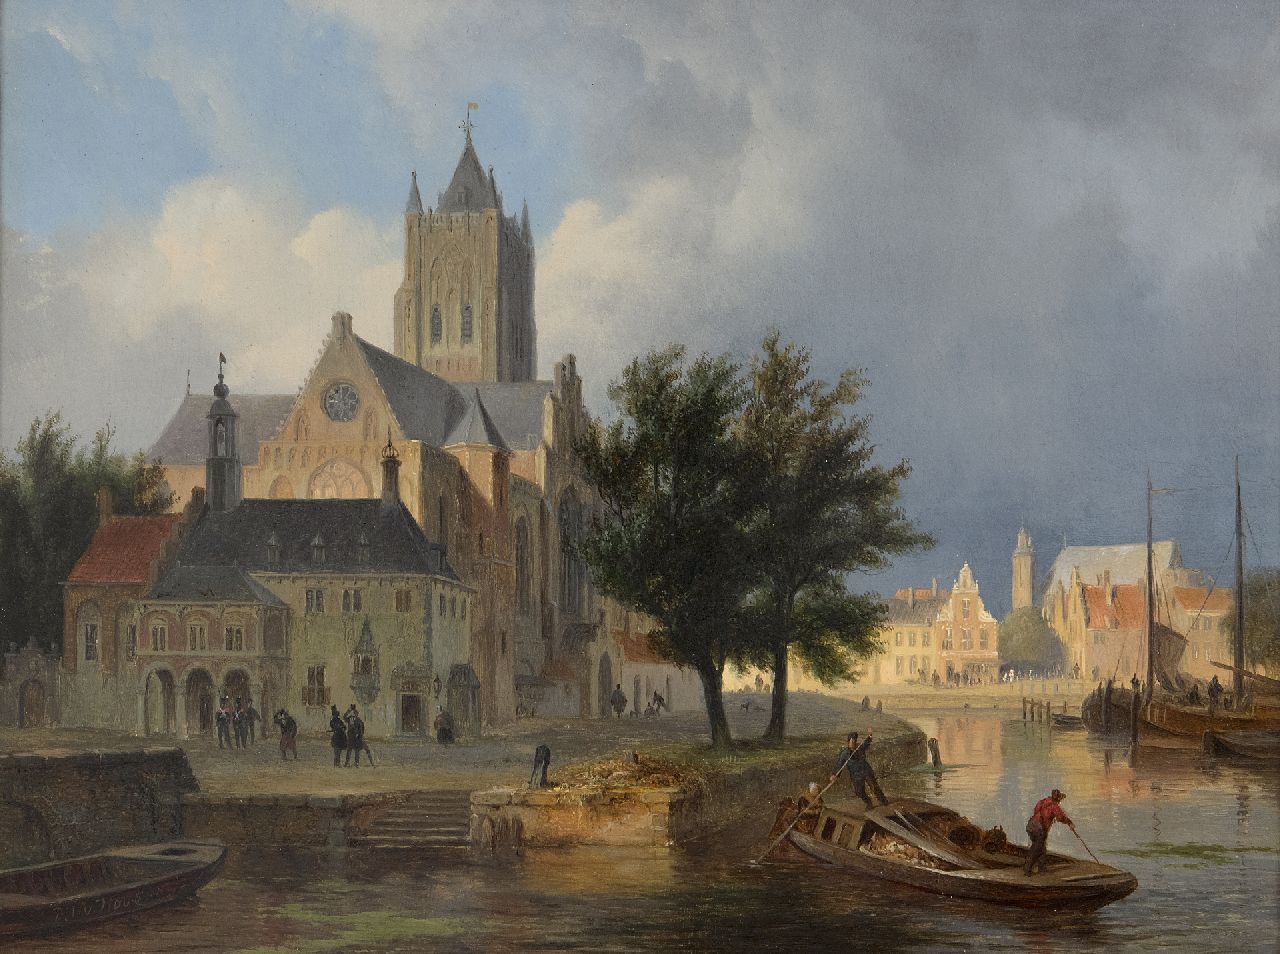 Hove B.J. van | Bartholomeus Johannes 'Bart' van Hove | Paintings offered for sale | A capriccio town view, possibly Gorinchem, oil on panel 28.8 x 38.0 cm, signed l.r.